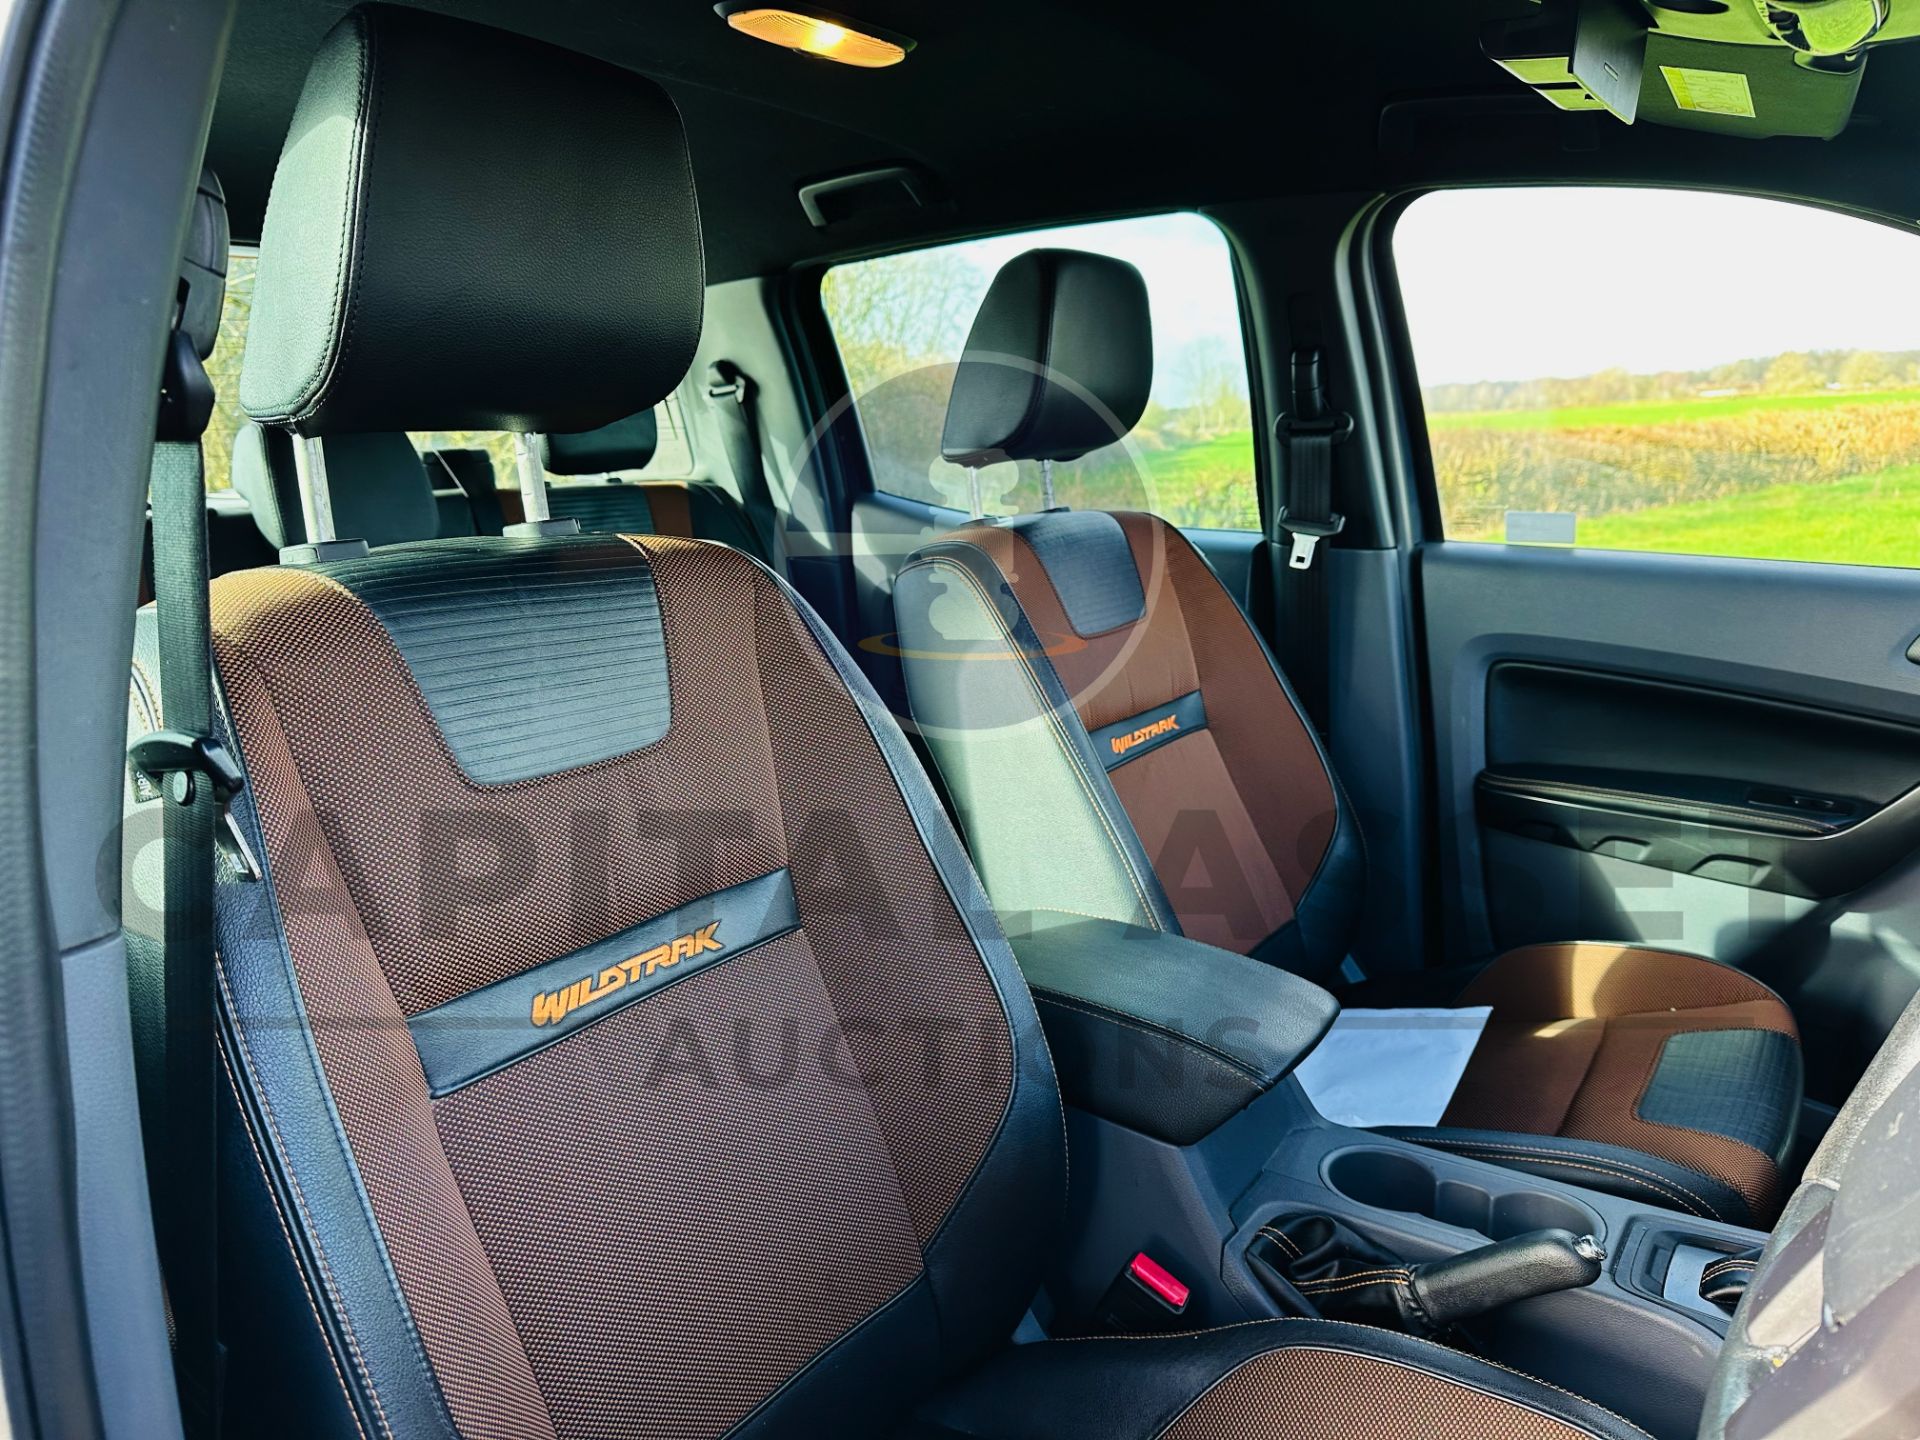 FORD RANGER *WILDTRAK EDITION* DOUBLE CAB PICK-UP (2018 - EURO 6) 3.2 TDCI - AUTOMATIC (1 OWNER) - Image 23 of 37